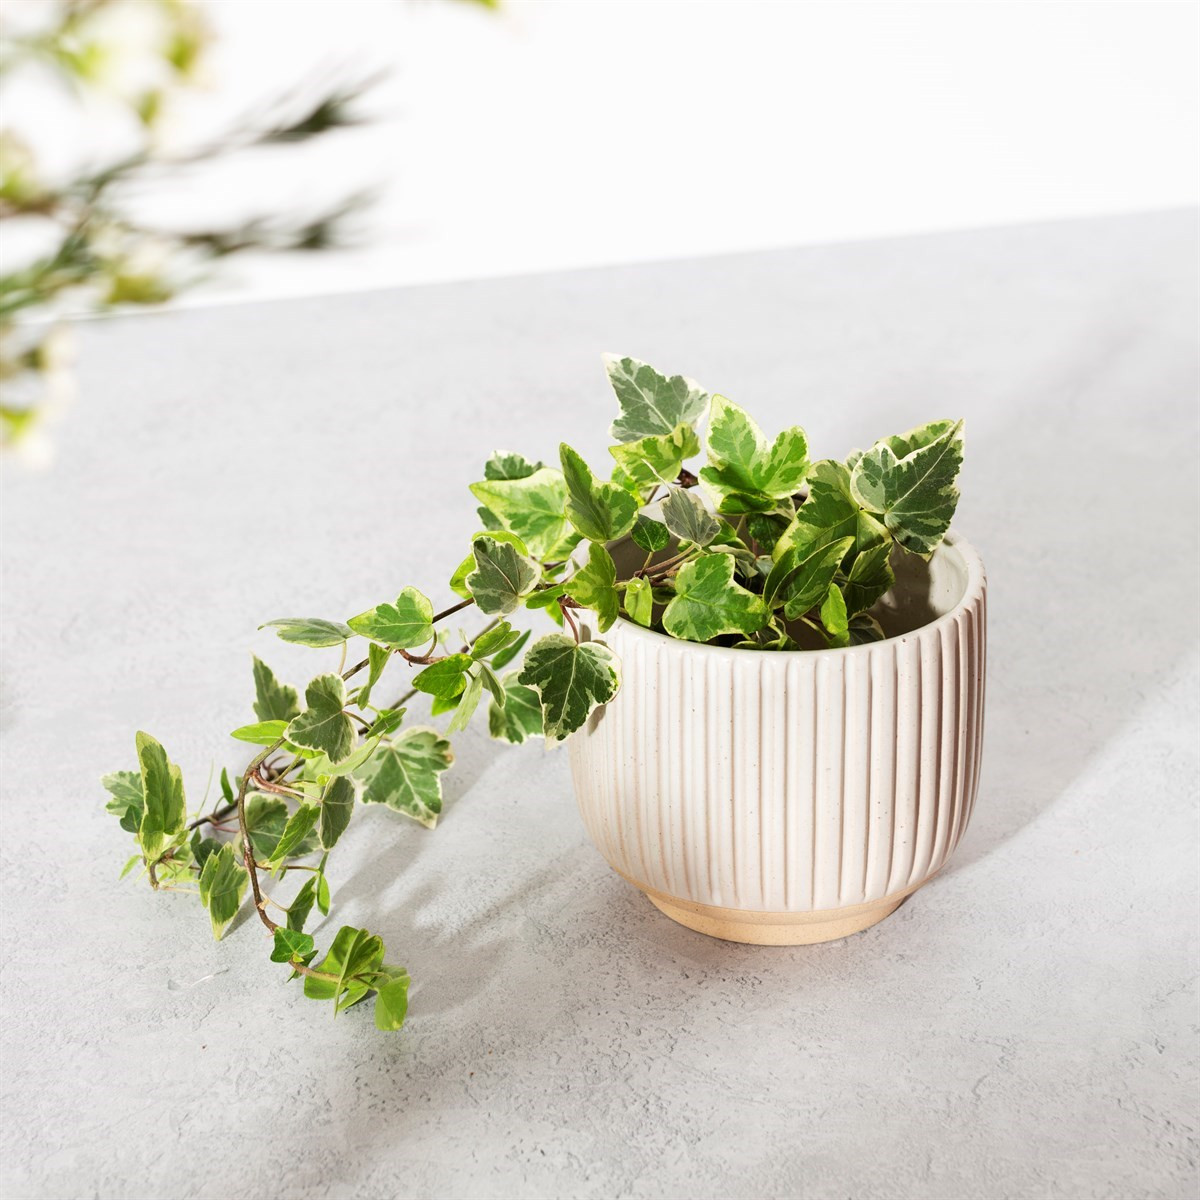 Sass & Belle Grooved Planter - Off White>